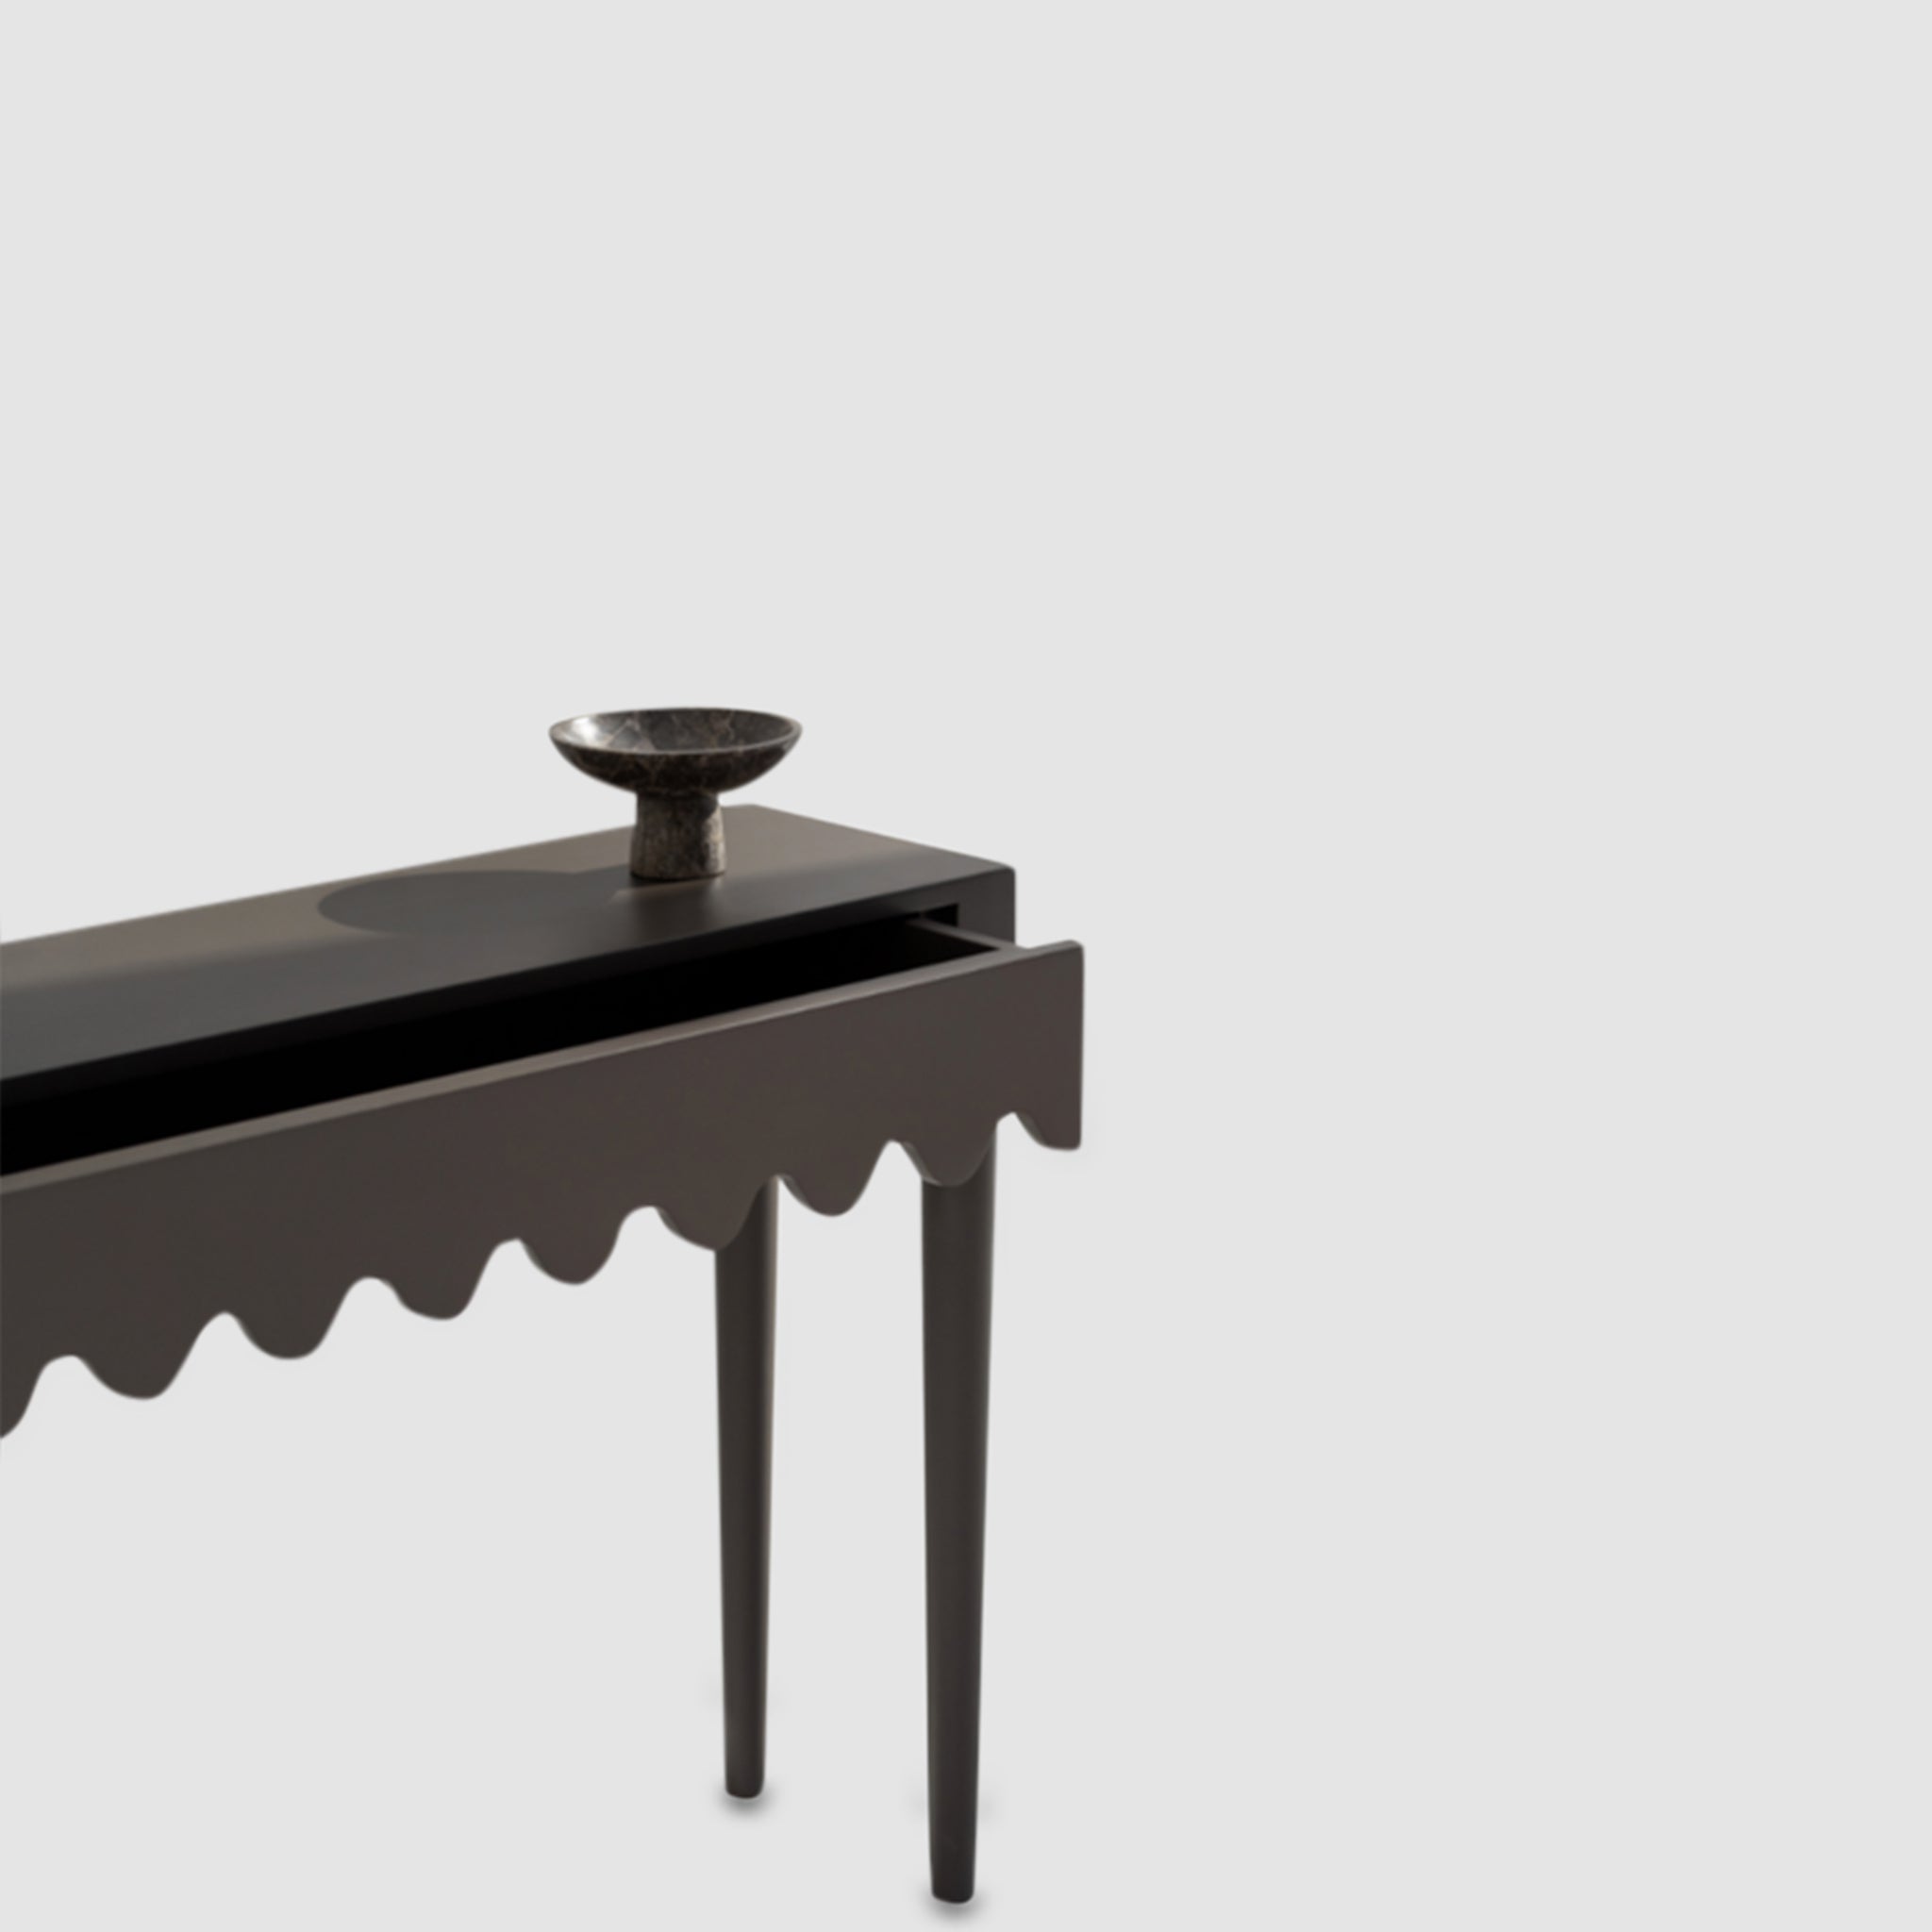 "Contemporary console table in black with a stylish wavy drawer design."